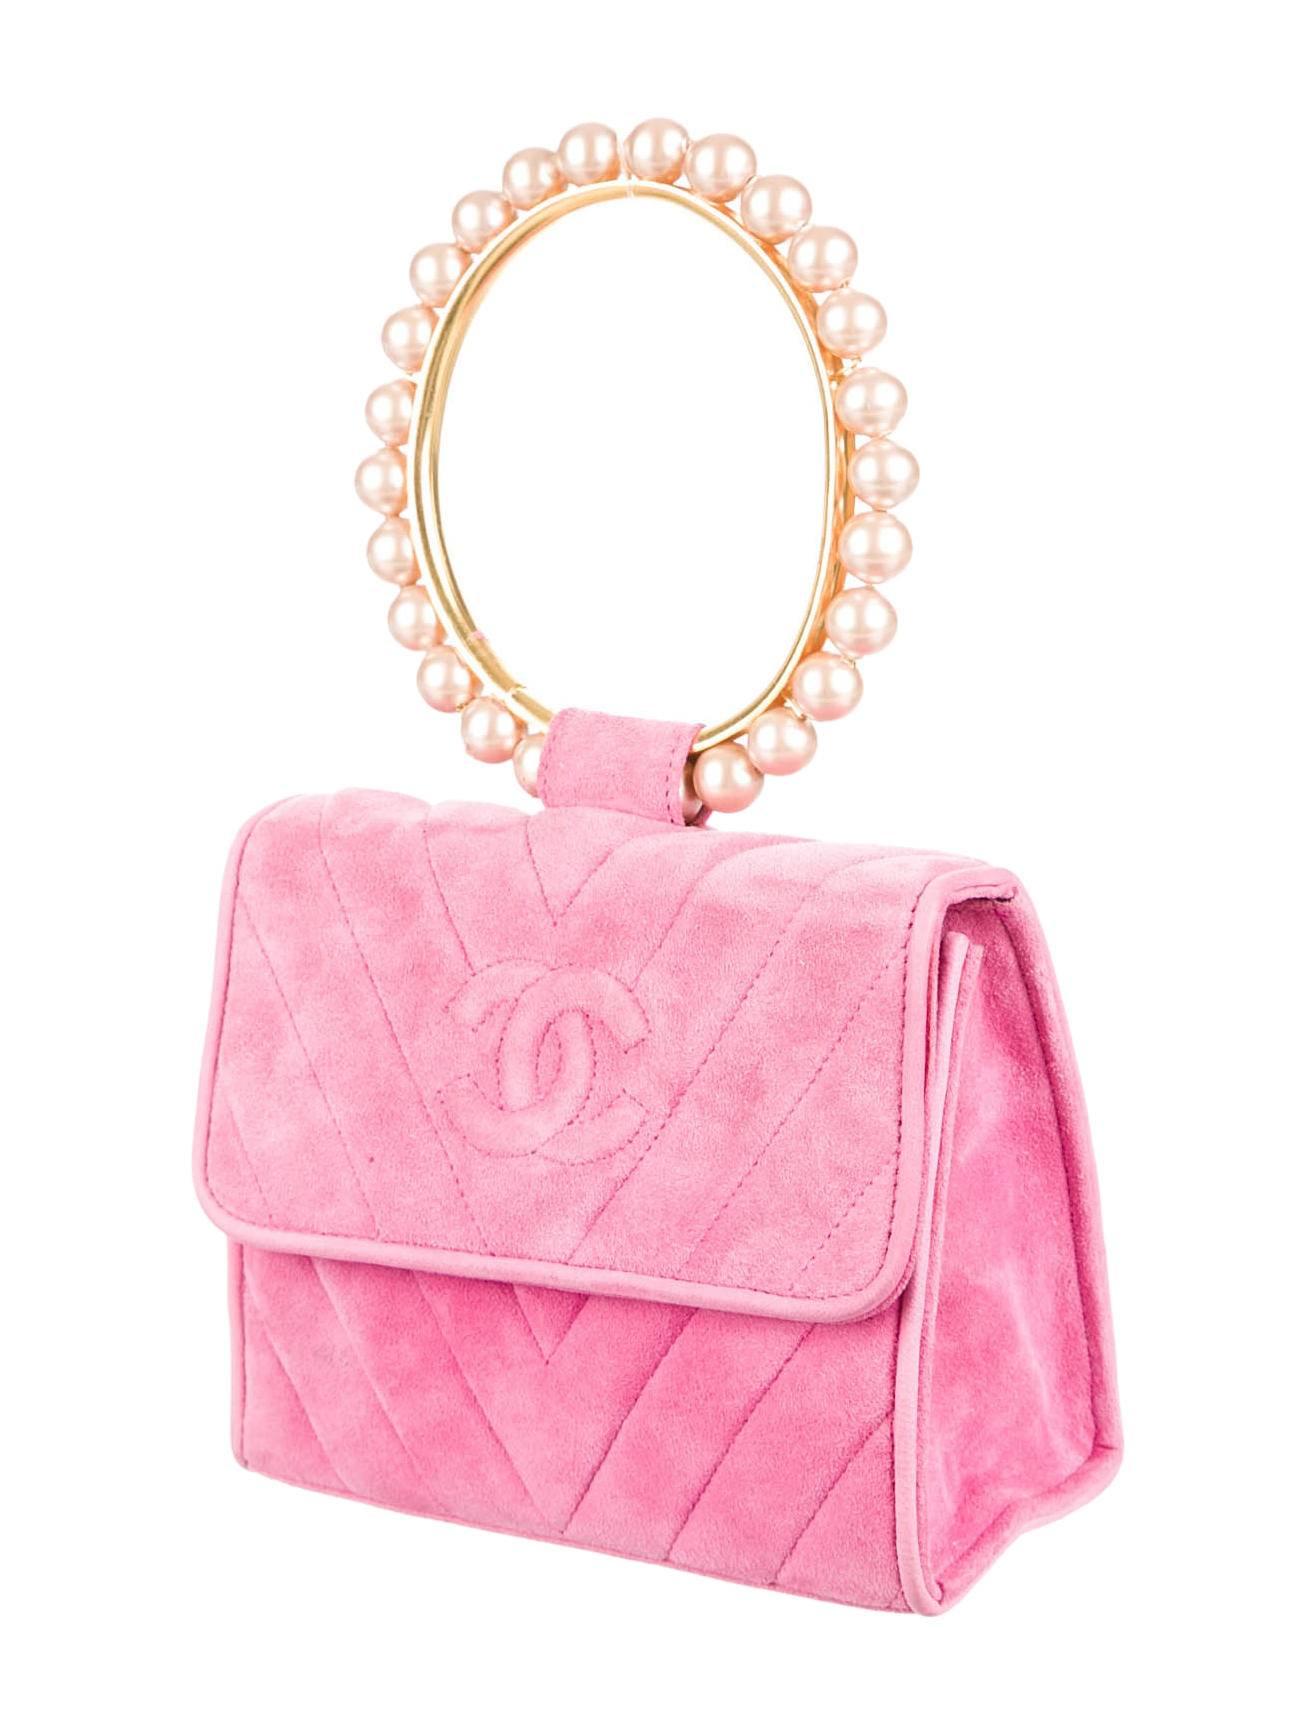 Pink suede Chanel handbag with with gold-tone hardware, contrasting pearl top handle, stitched CC logo at front, black leather lining, zip closure pocket at interior wall and snap closure at front flap. Serial number reads 1988006. Includes